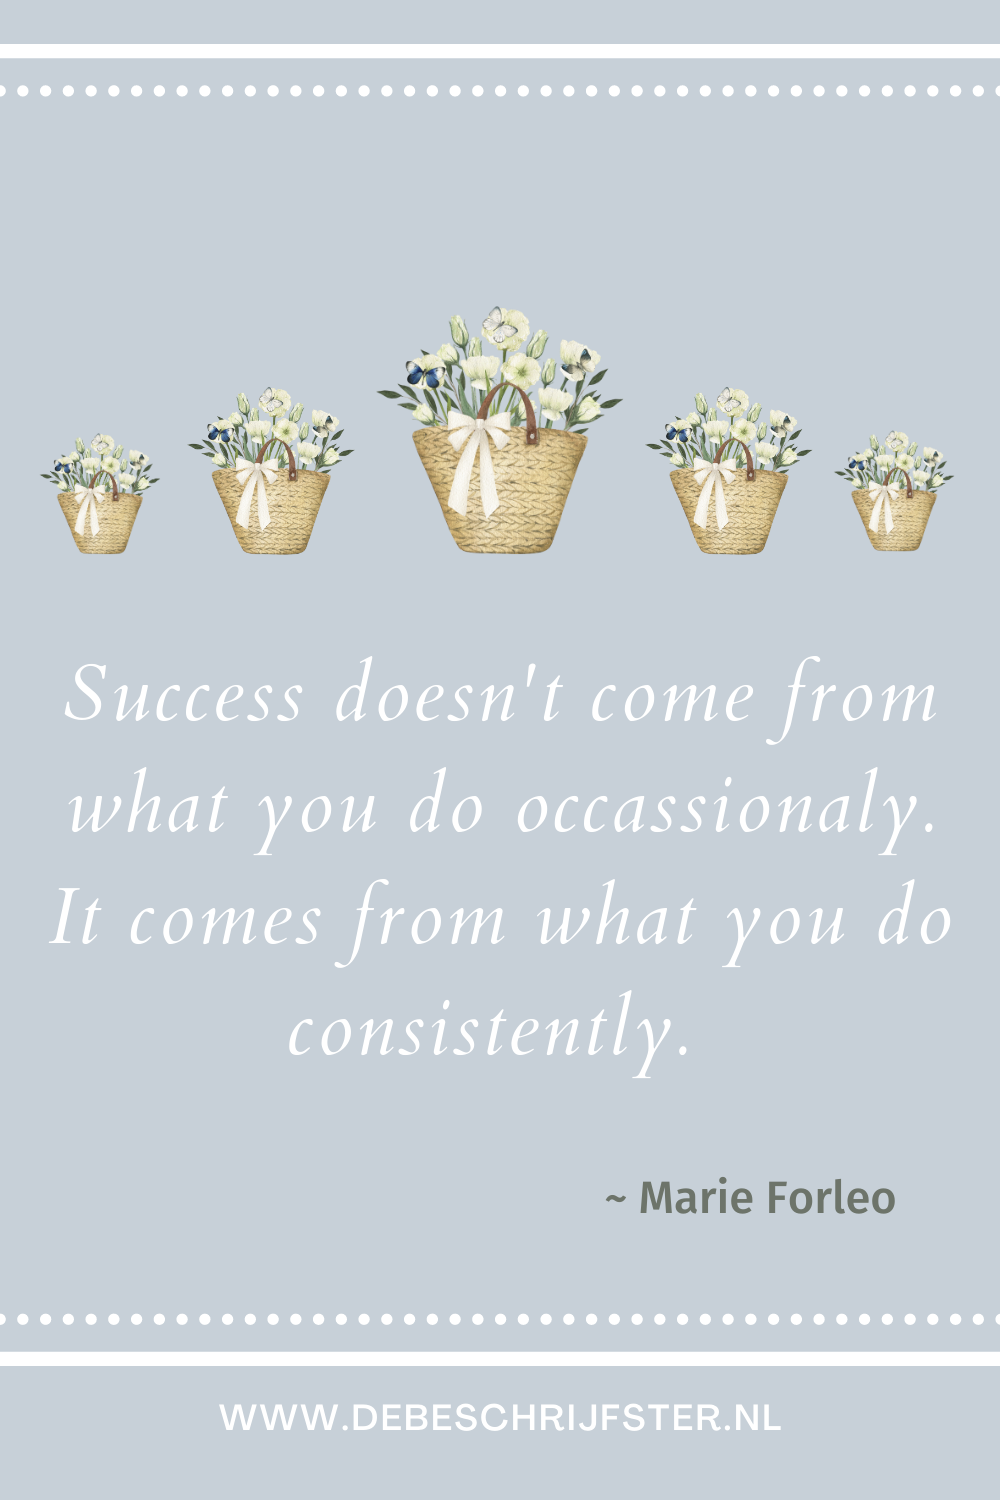 Success doesn't come from what you do occassionaly. It comes from what you do consistently. Marie Forleo